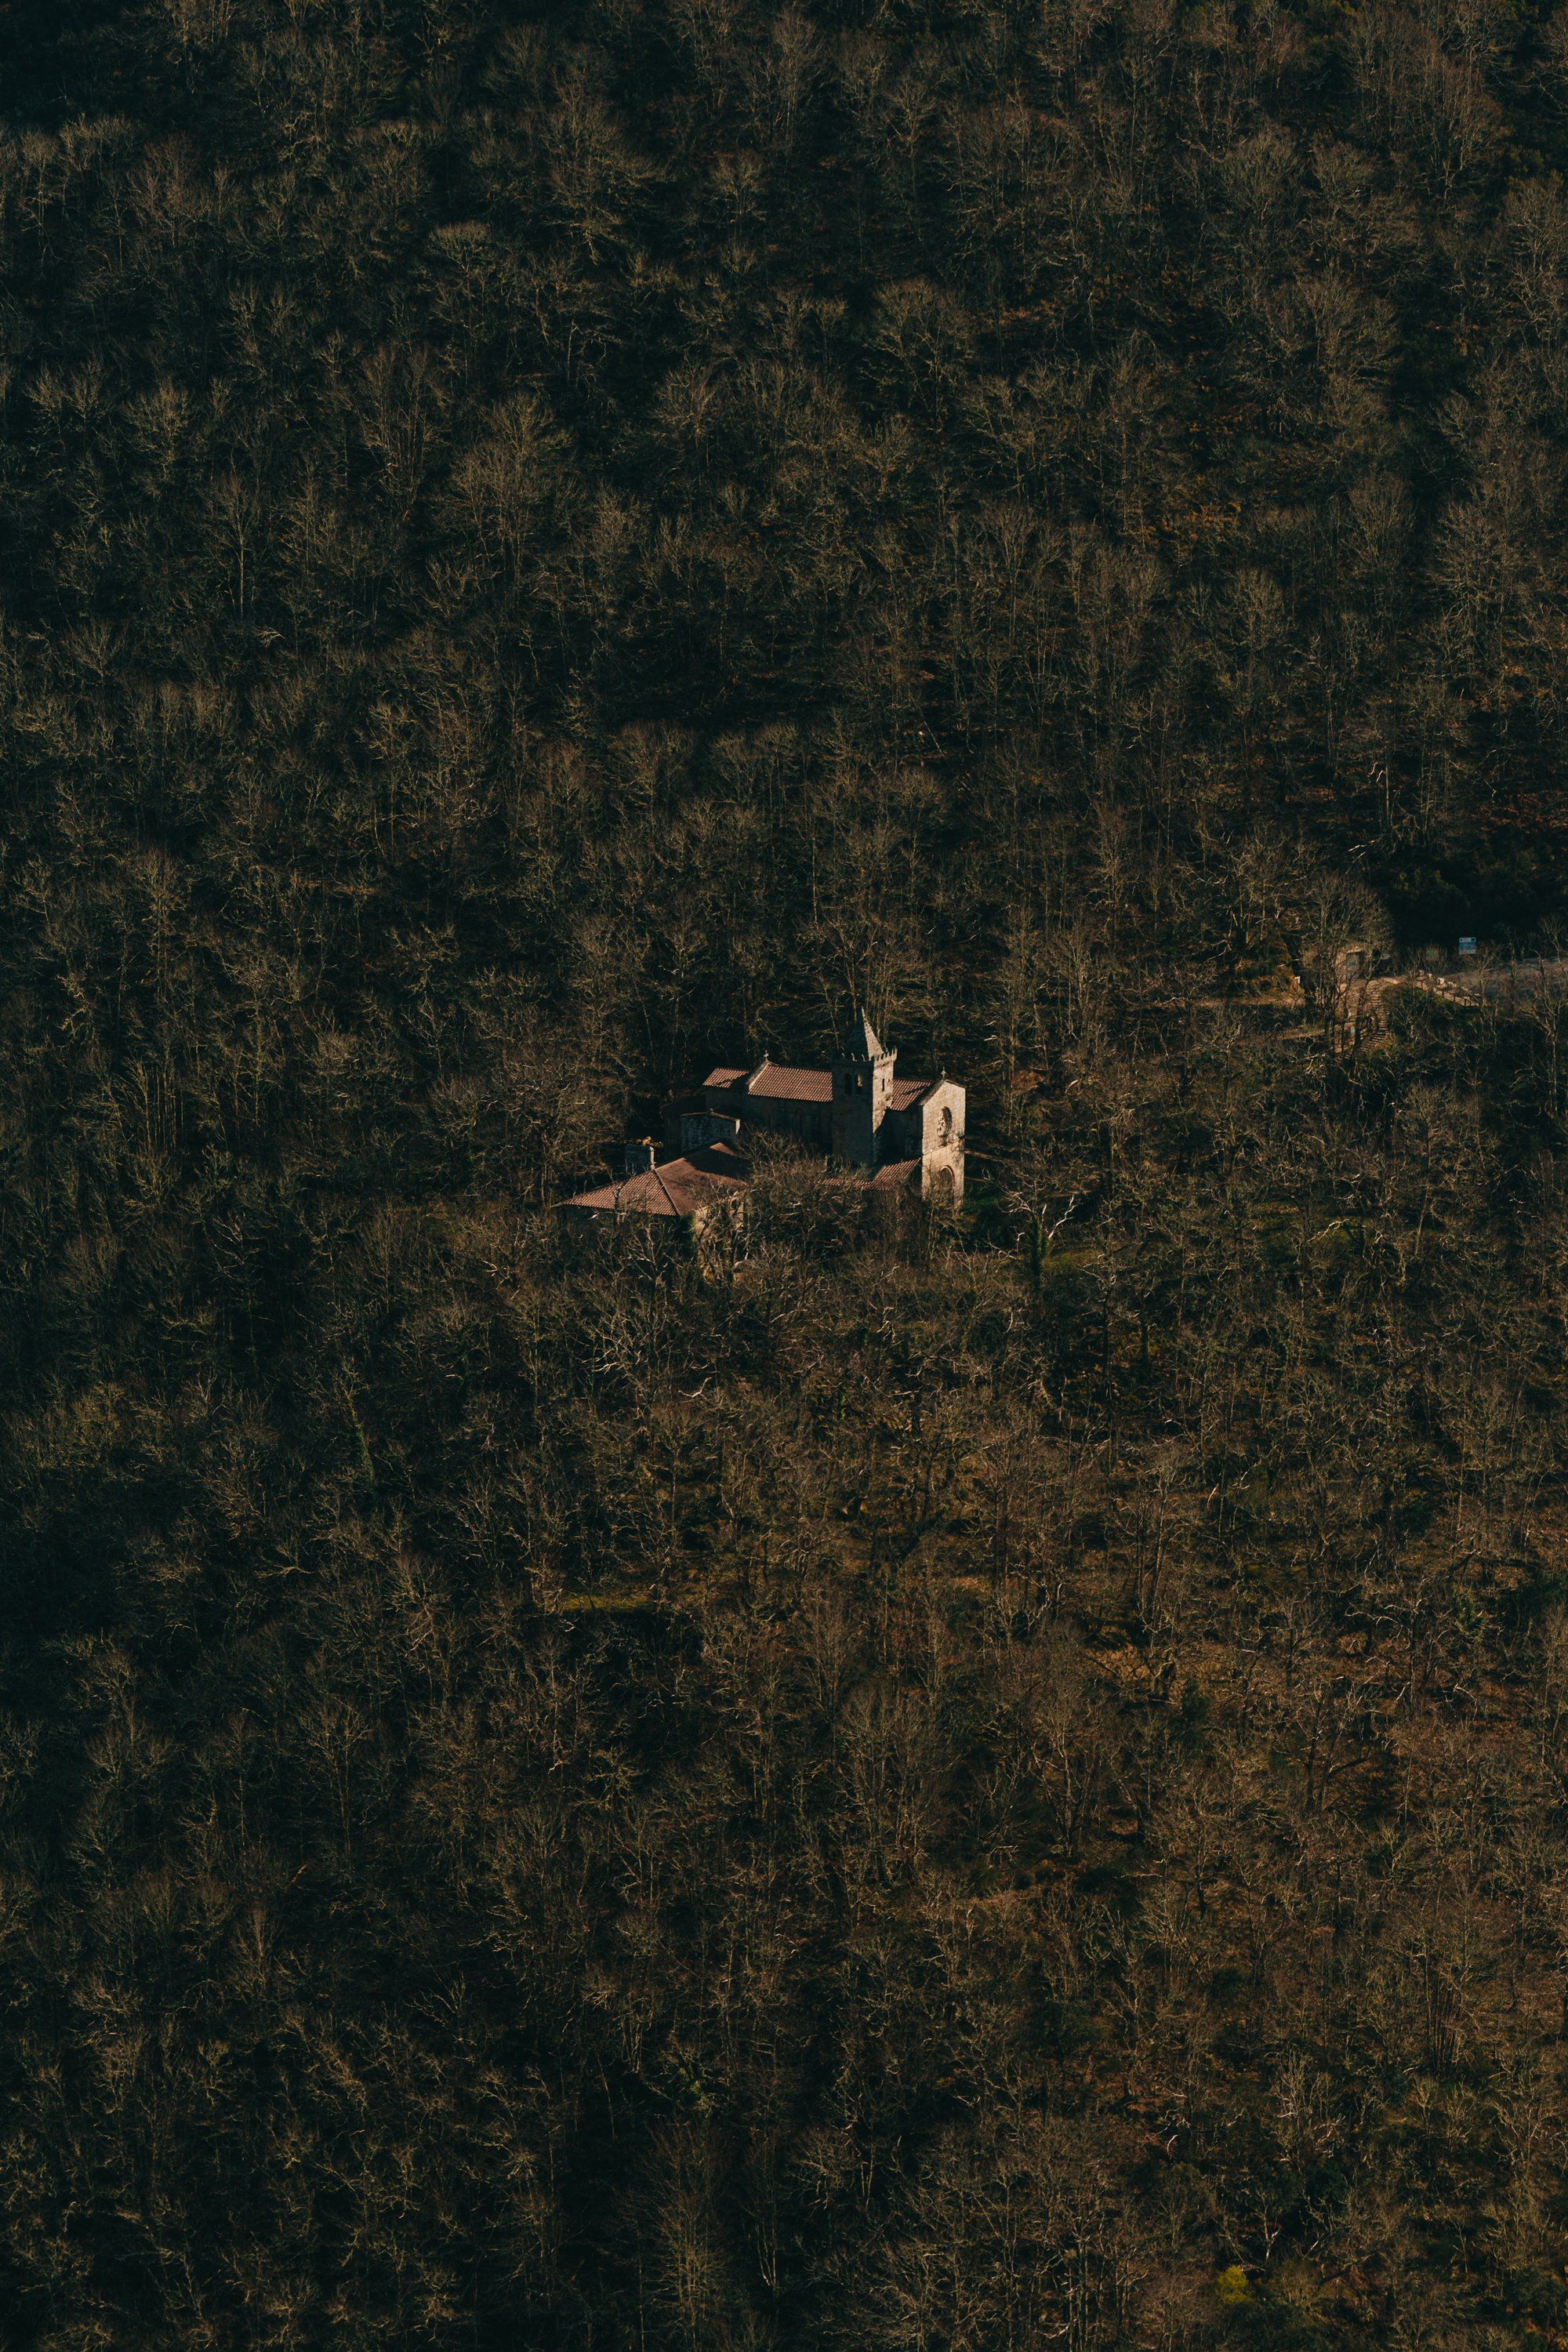 aerial photo of a building sitting within a dense forest 一座建筑在密林中的空中照片